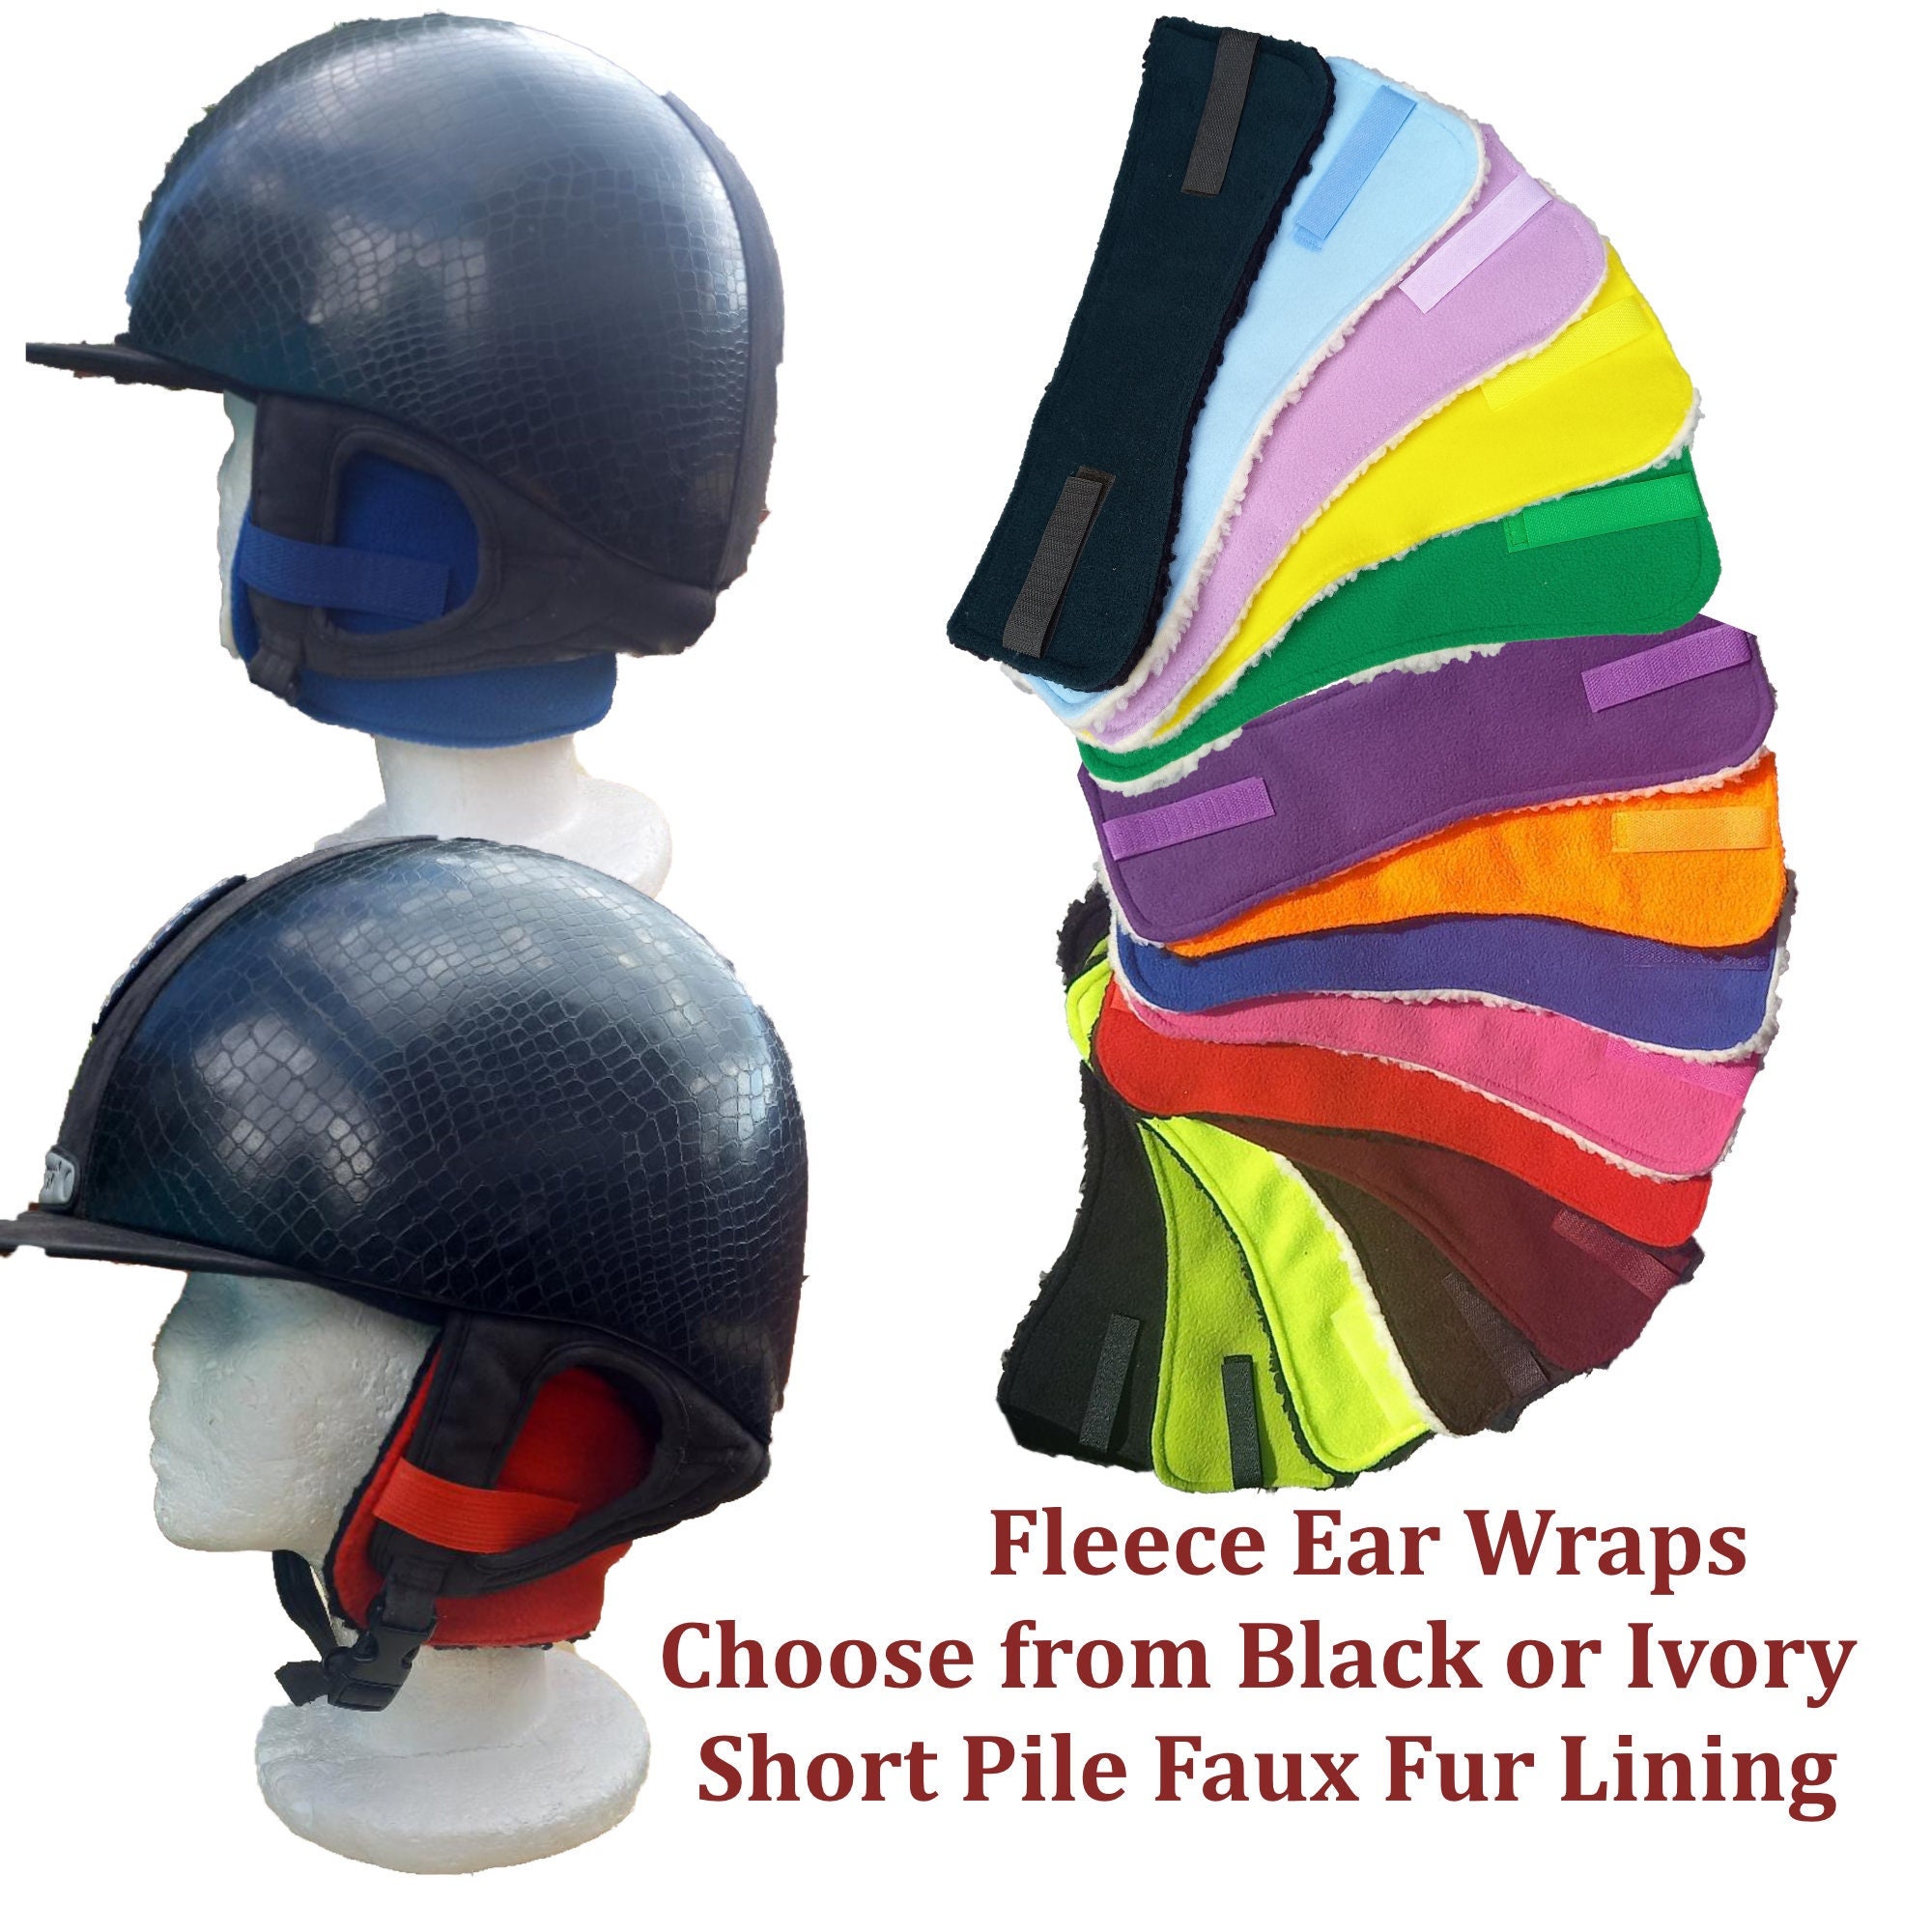 Riding hat ear warmers fleece with Sherpa fleece CHOOSE YOUR COLOR horses WINTER 